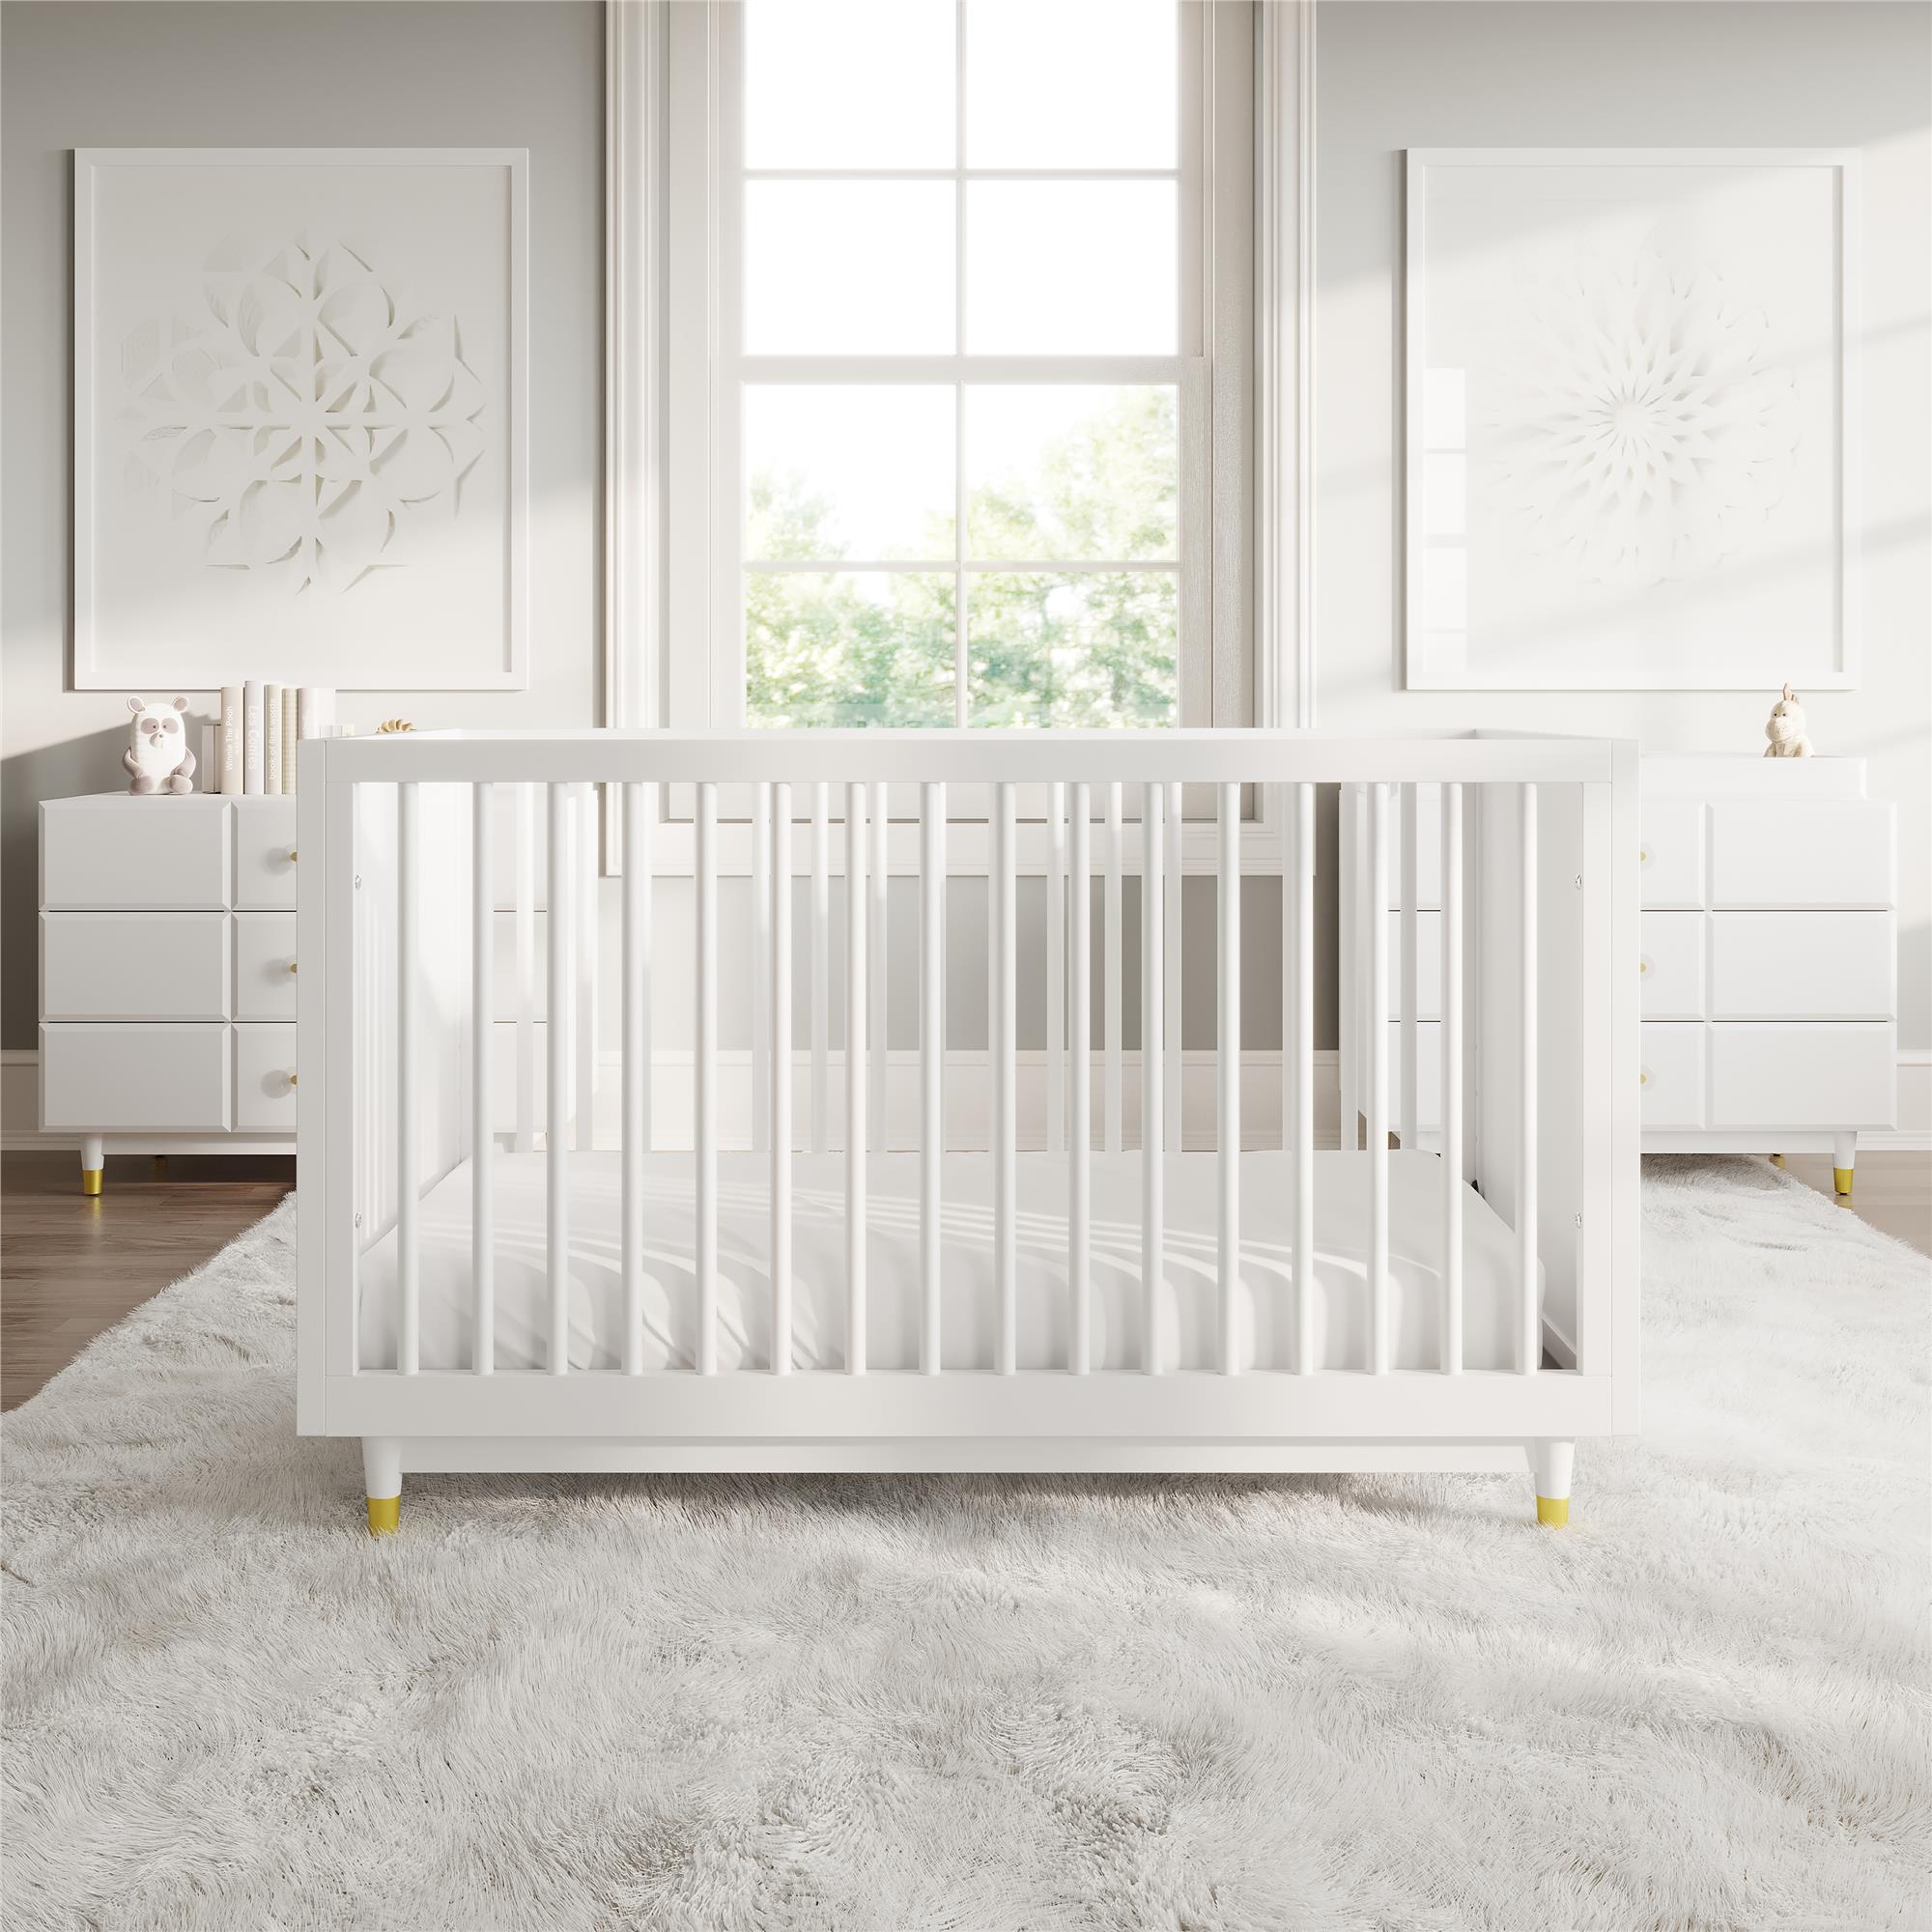 Little Seeds Aviary 3-in-1 Crib with Adjustable Mattress Height, White - image 2 of 32